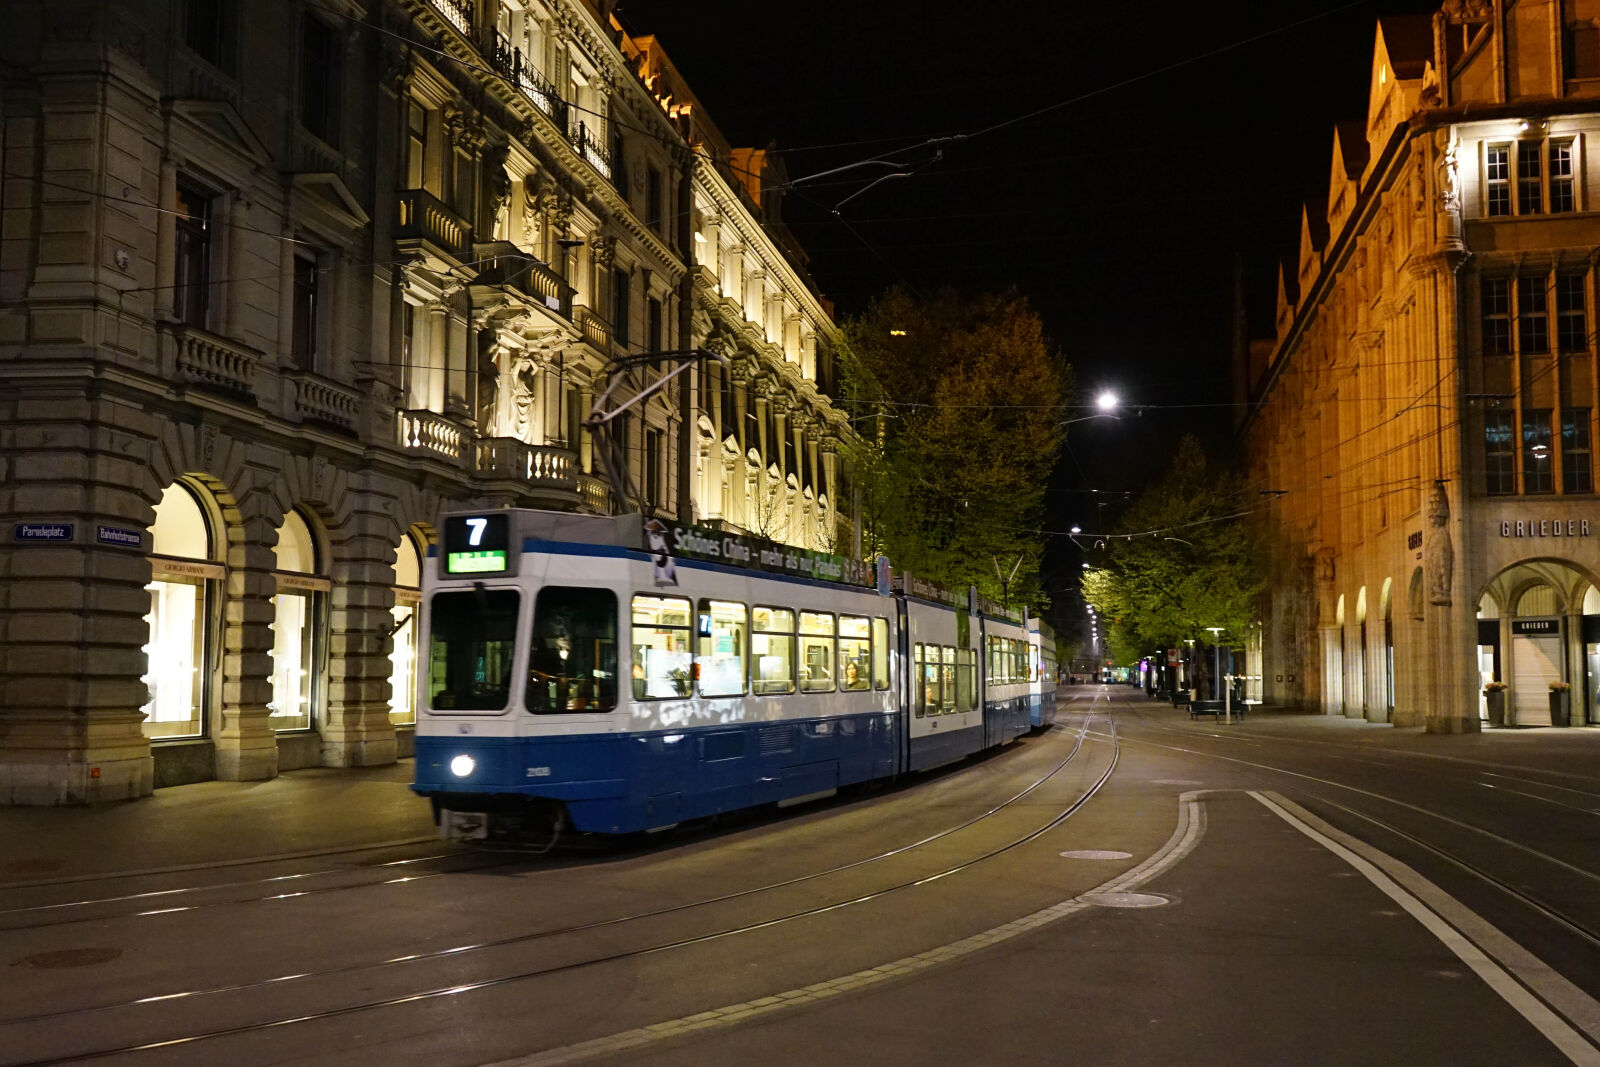 Sony a7 II sample photo. Old, town, tram, tram photography